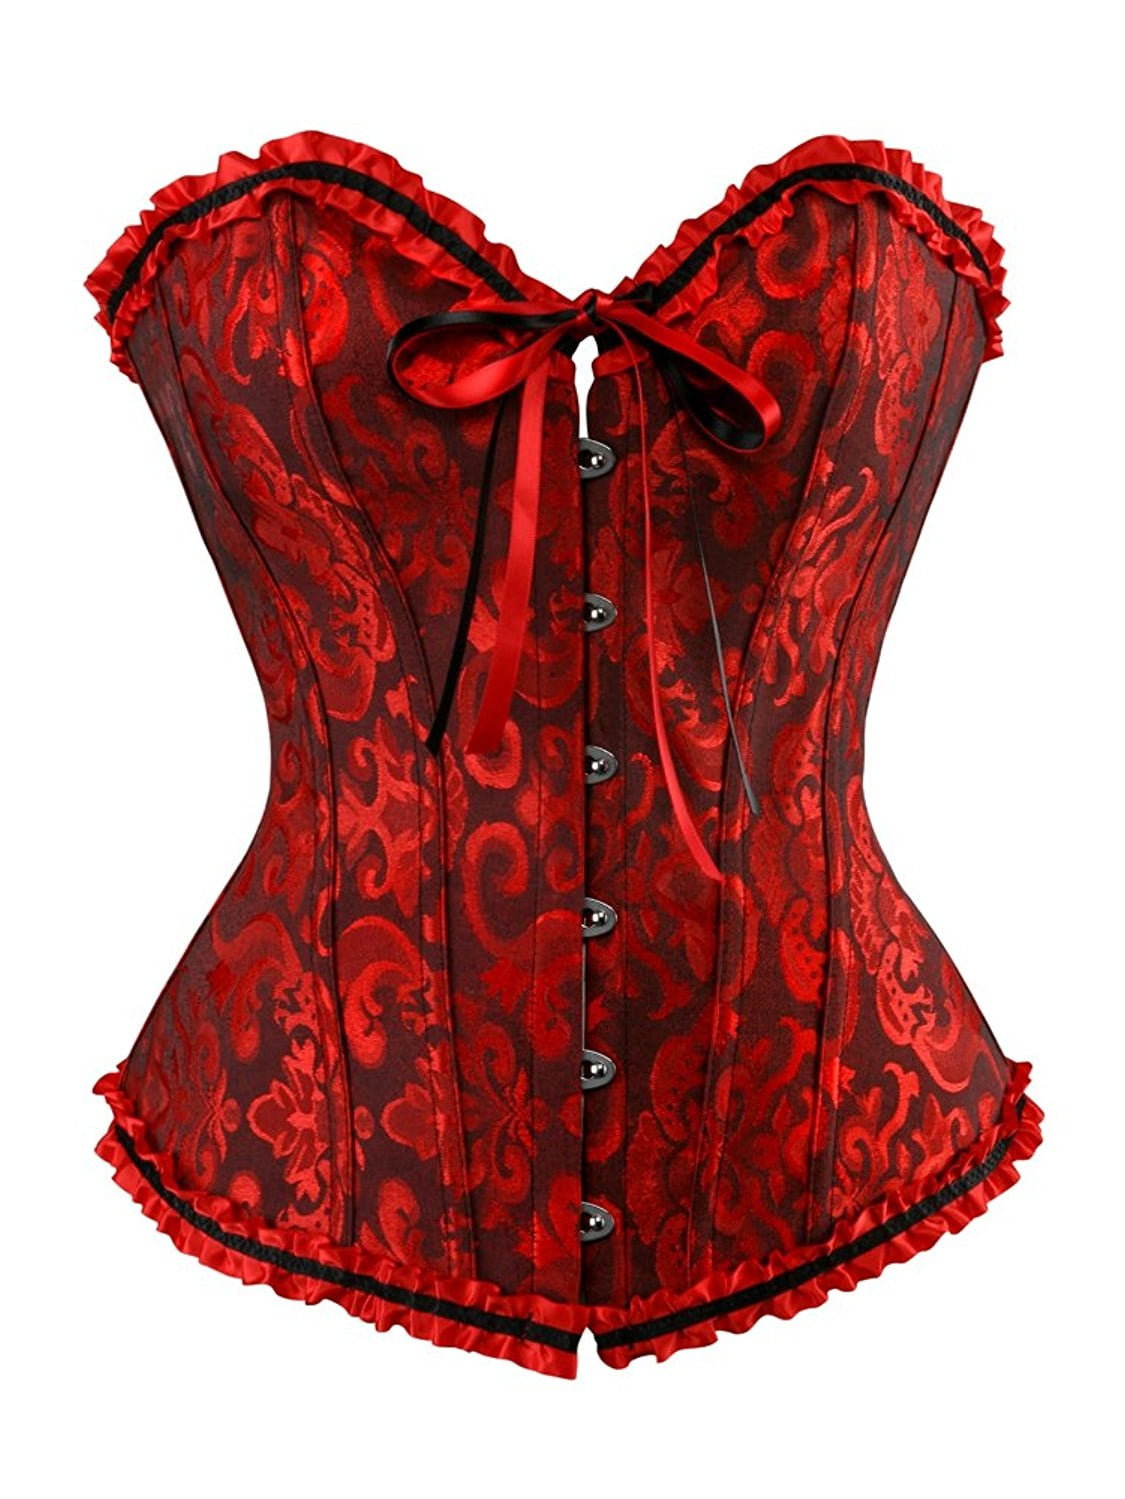 Miss Moly Womens Pu Faux Leather Plus Size Steampunk Corset Bustier Lingerie Clubwear Dark Red 